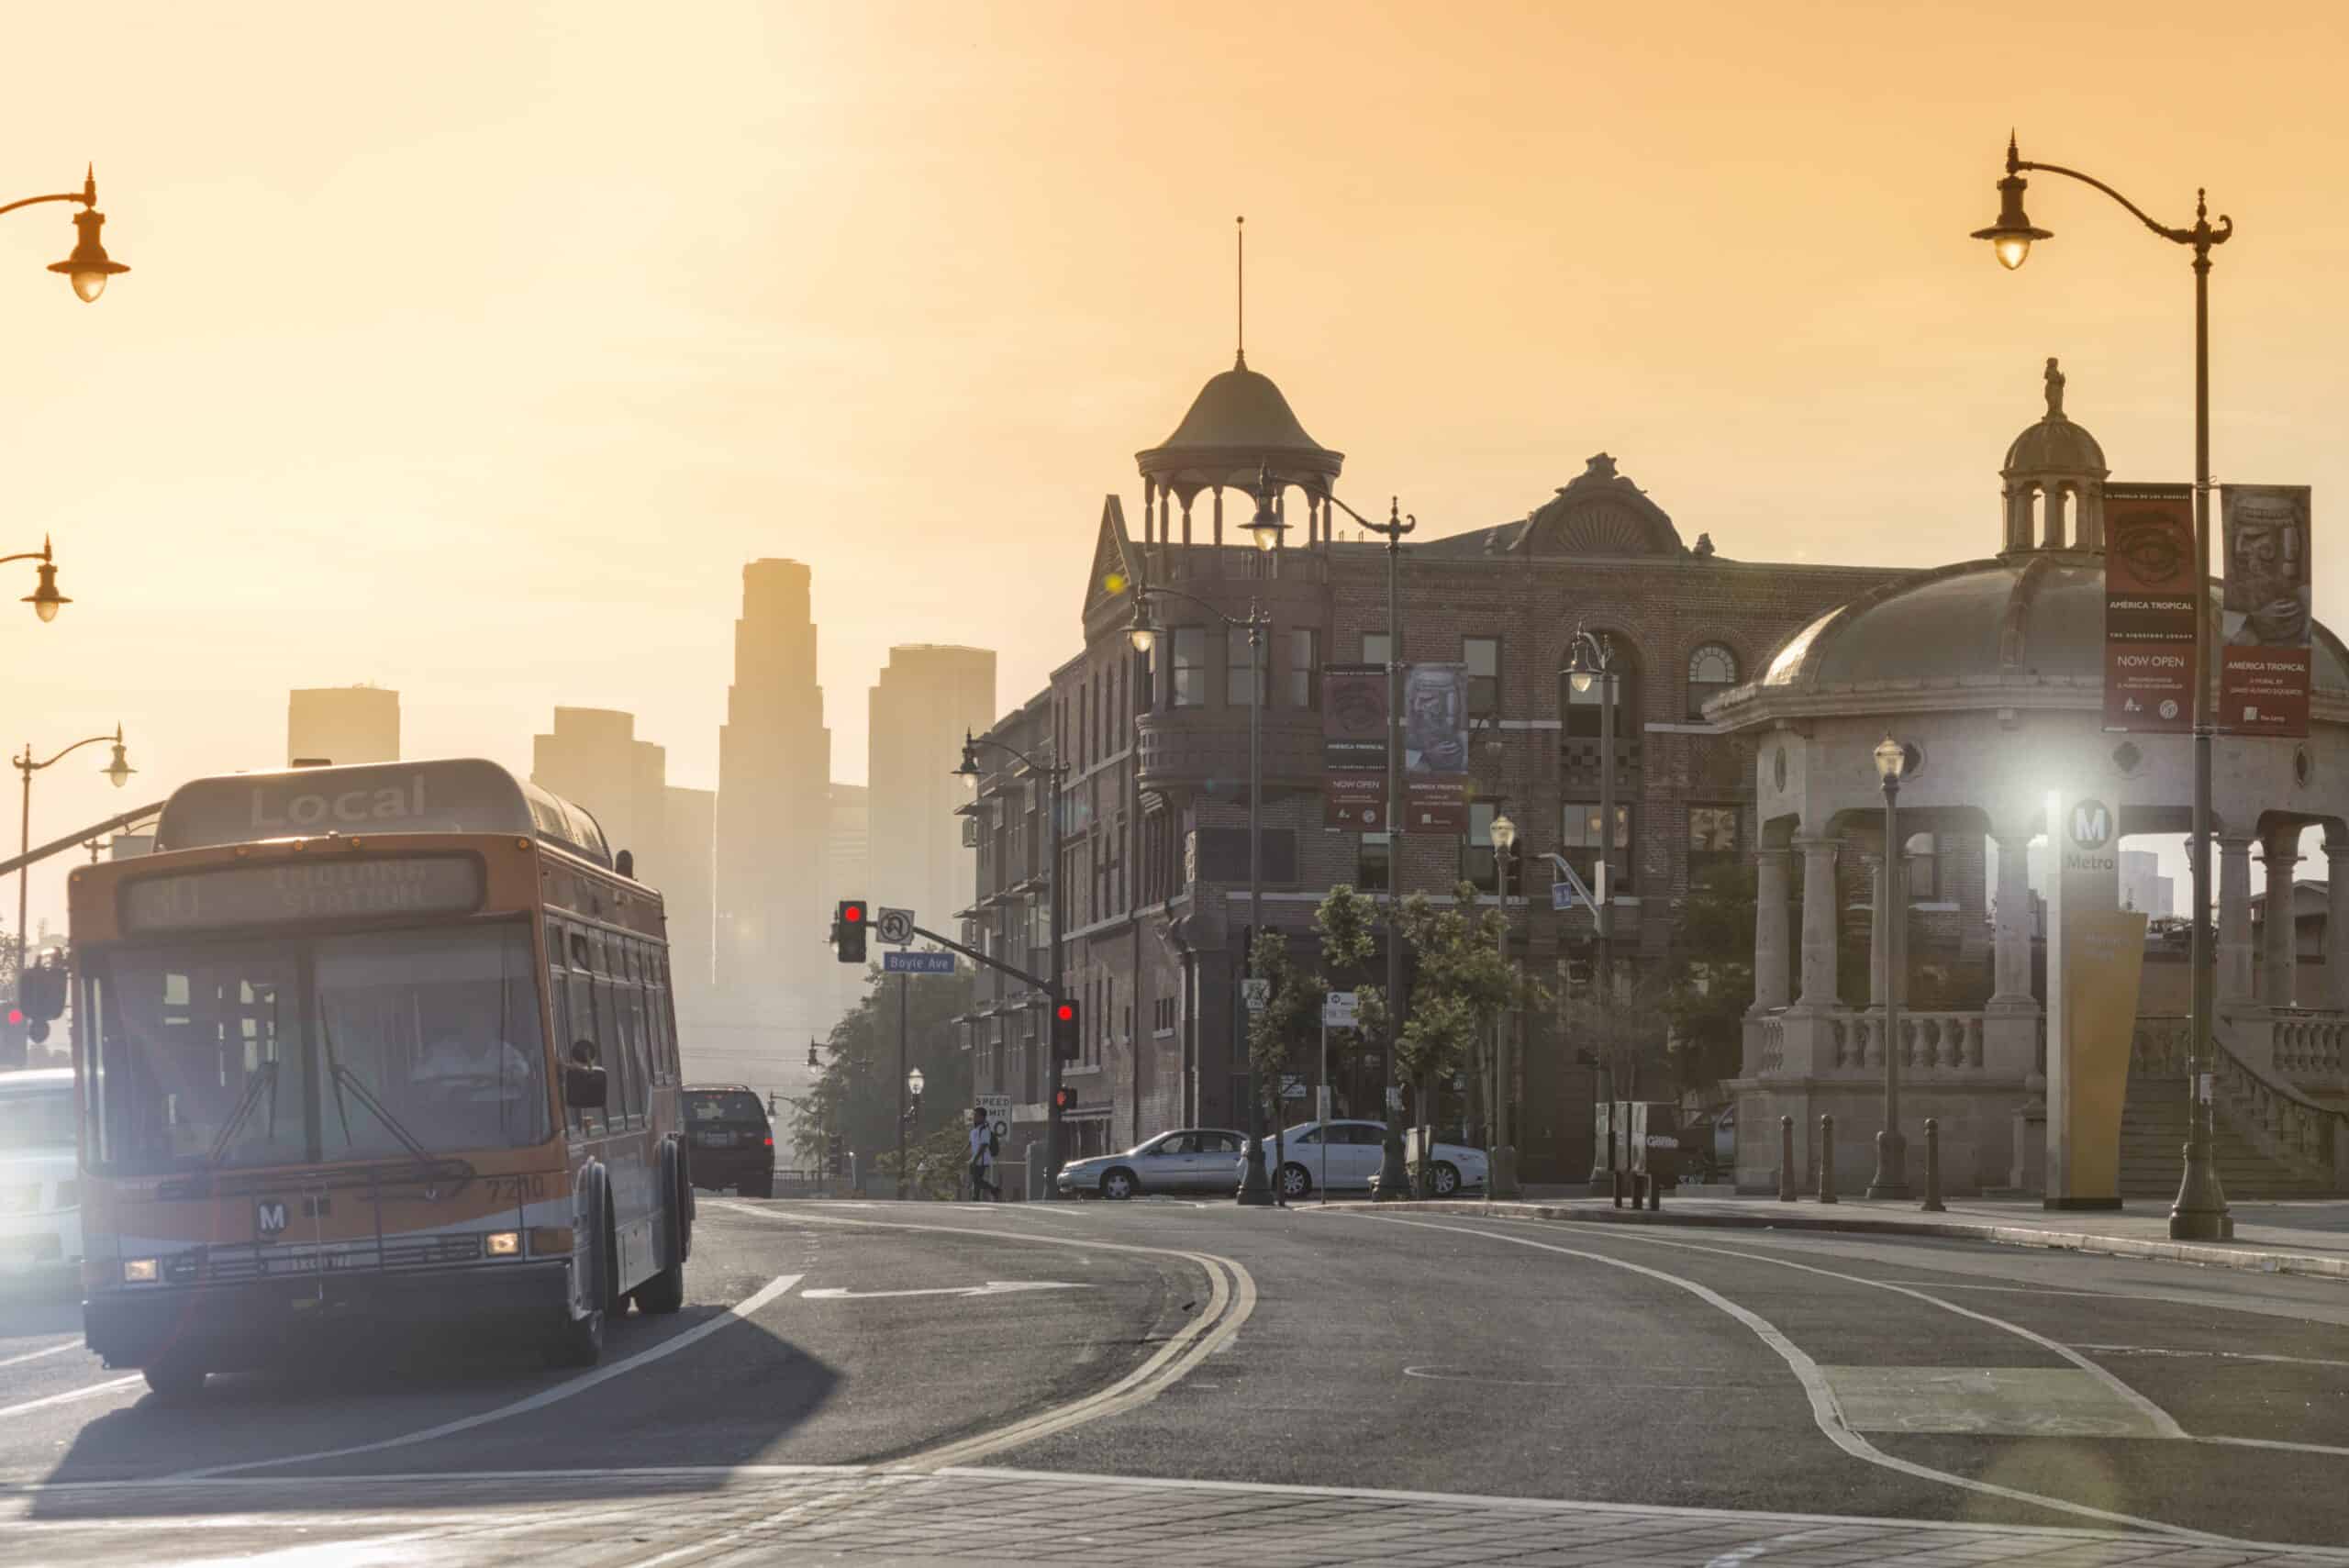 A bus passes by the Boyle Hotel in Los Angeles